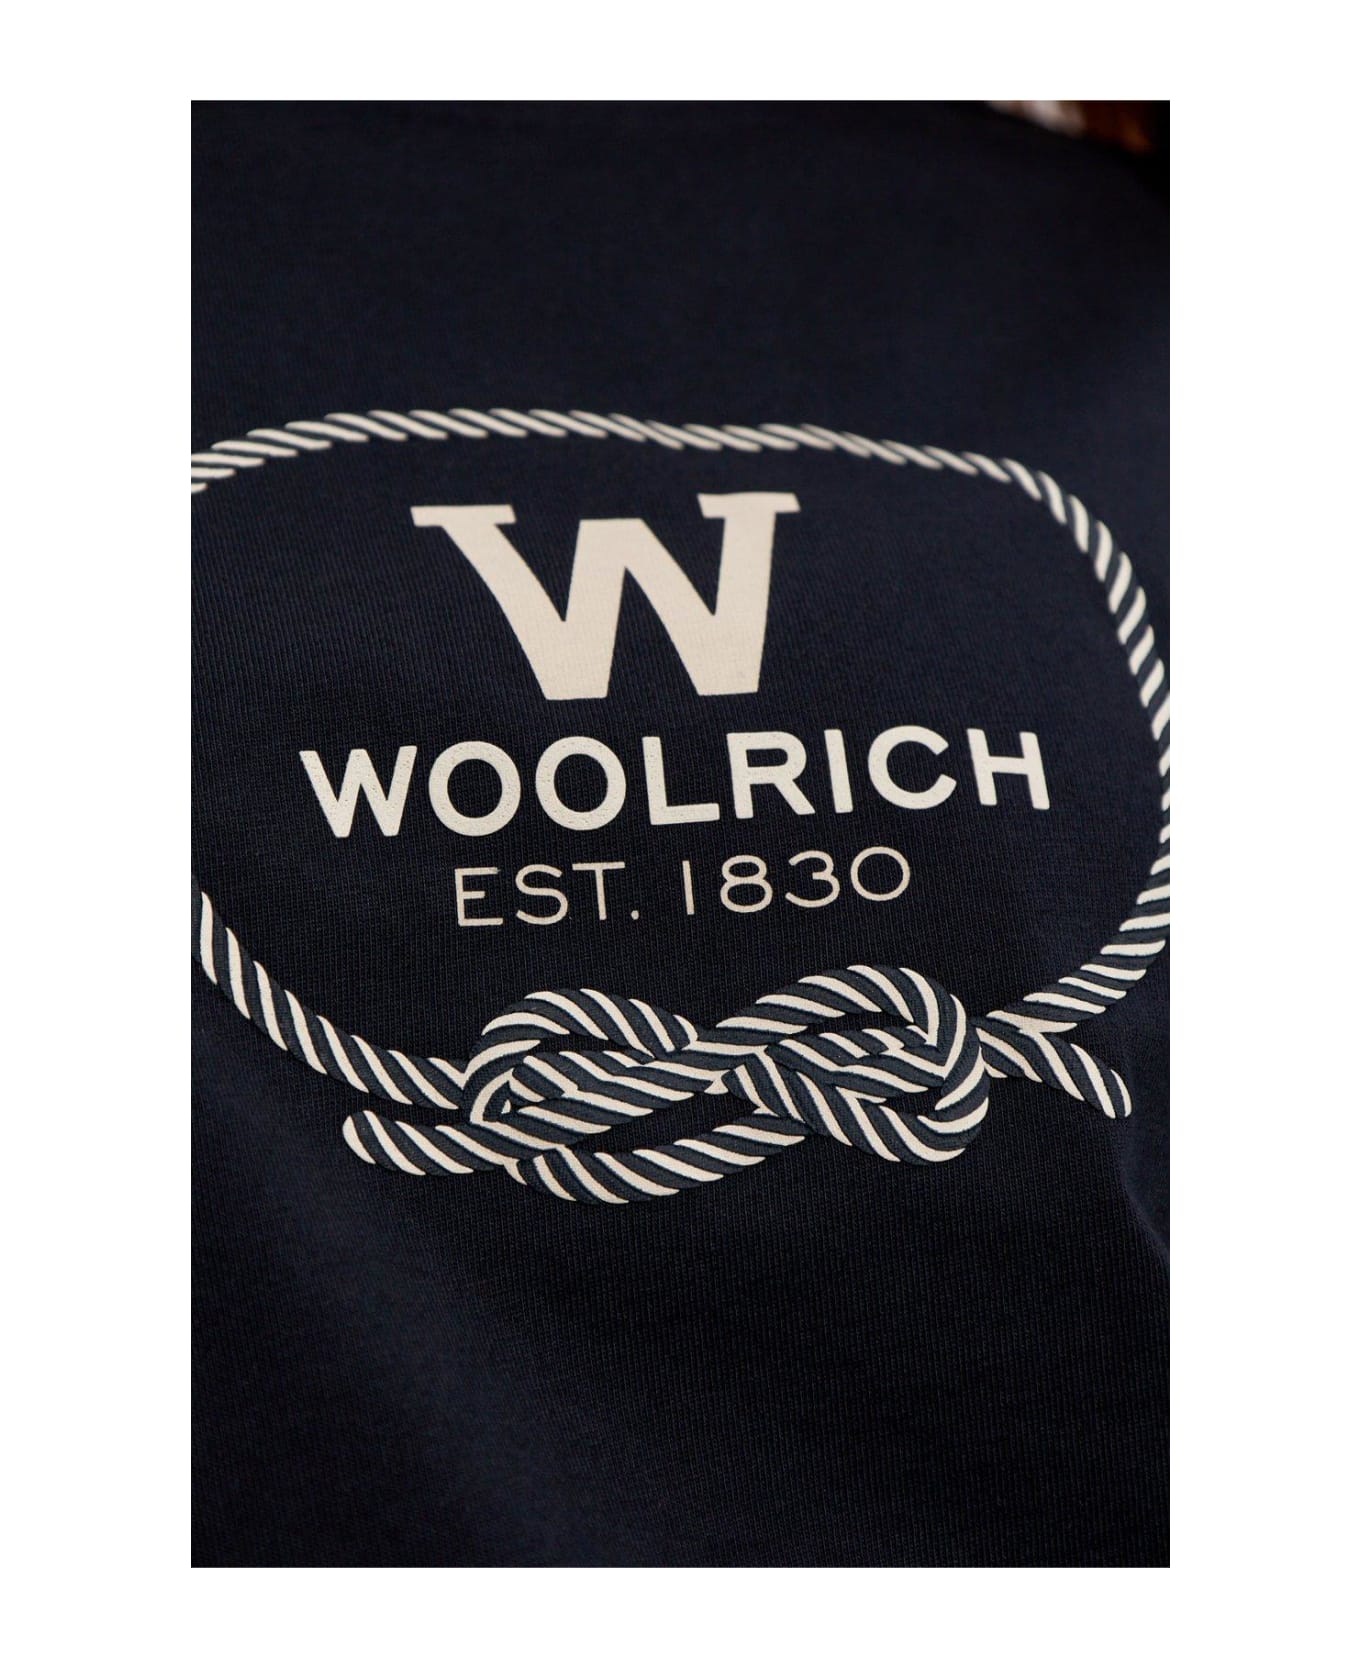 Woolrich Graphic Printed Oversized T-shirt - BLUE Tシャツ